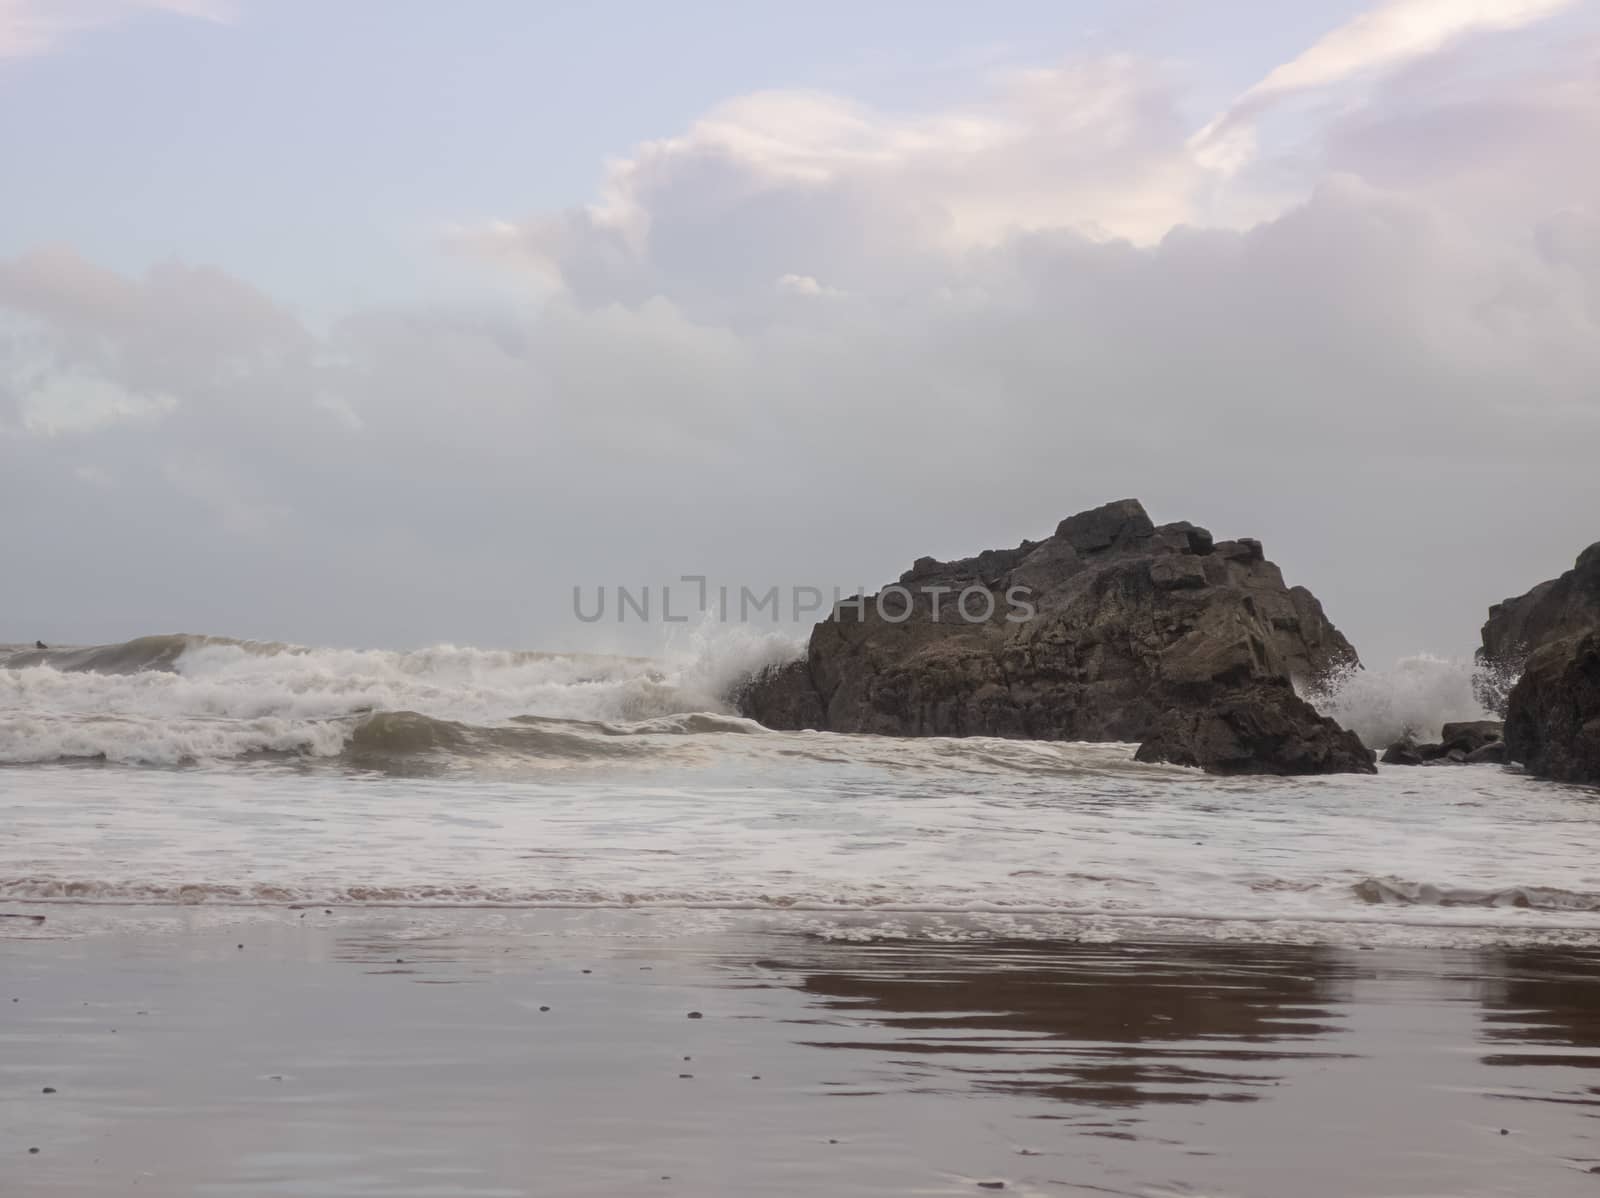 Waves crashing against a large rock as the tide moves in on Caswell Bay Beach, in Gower, Wales, UK.